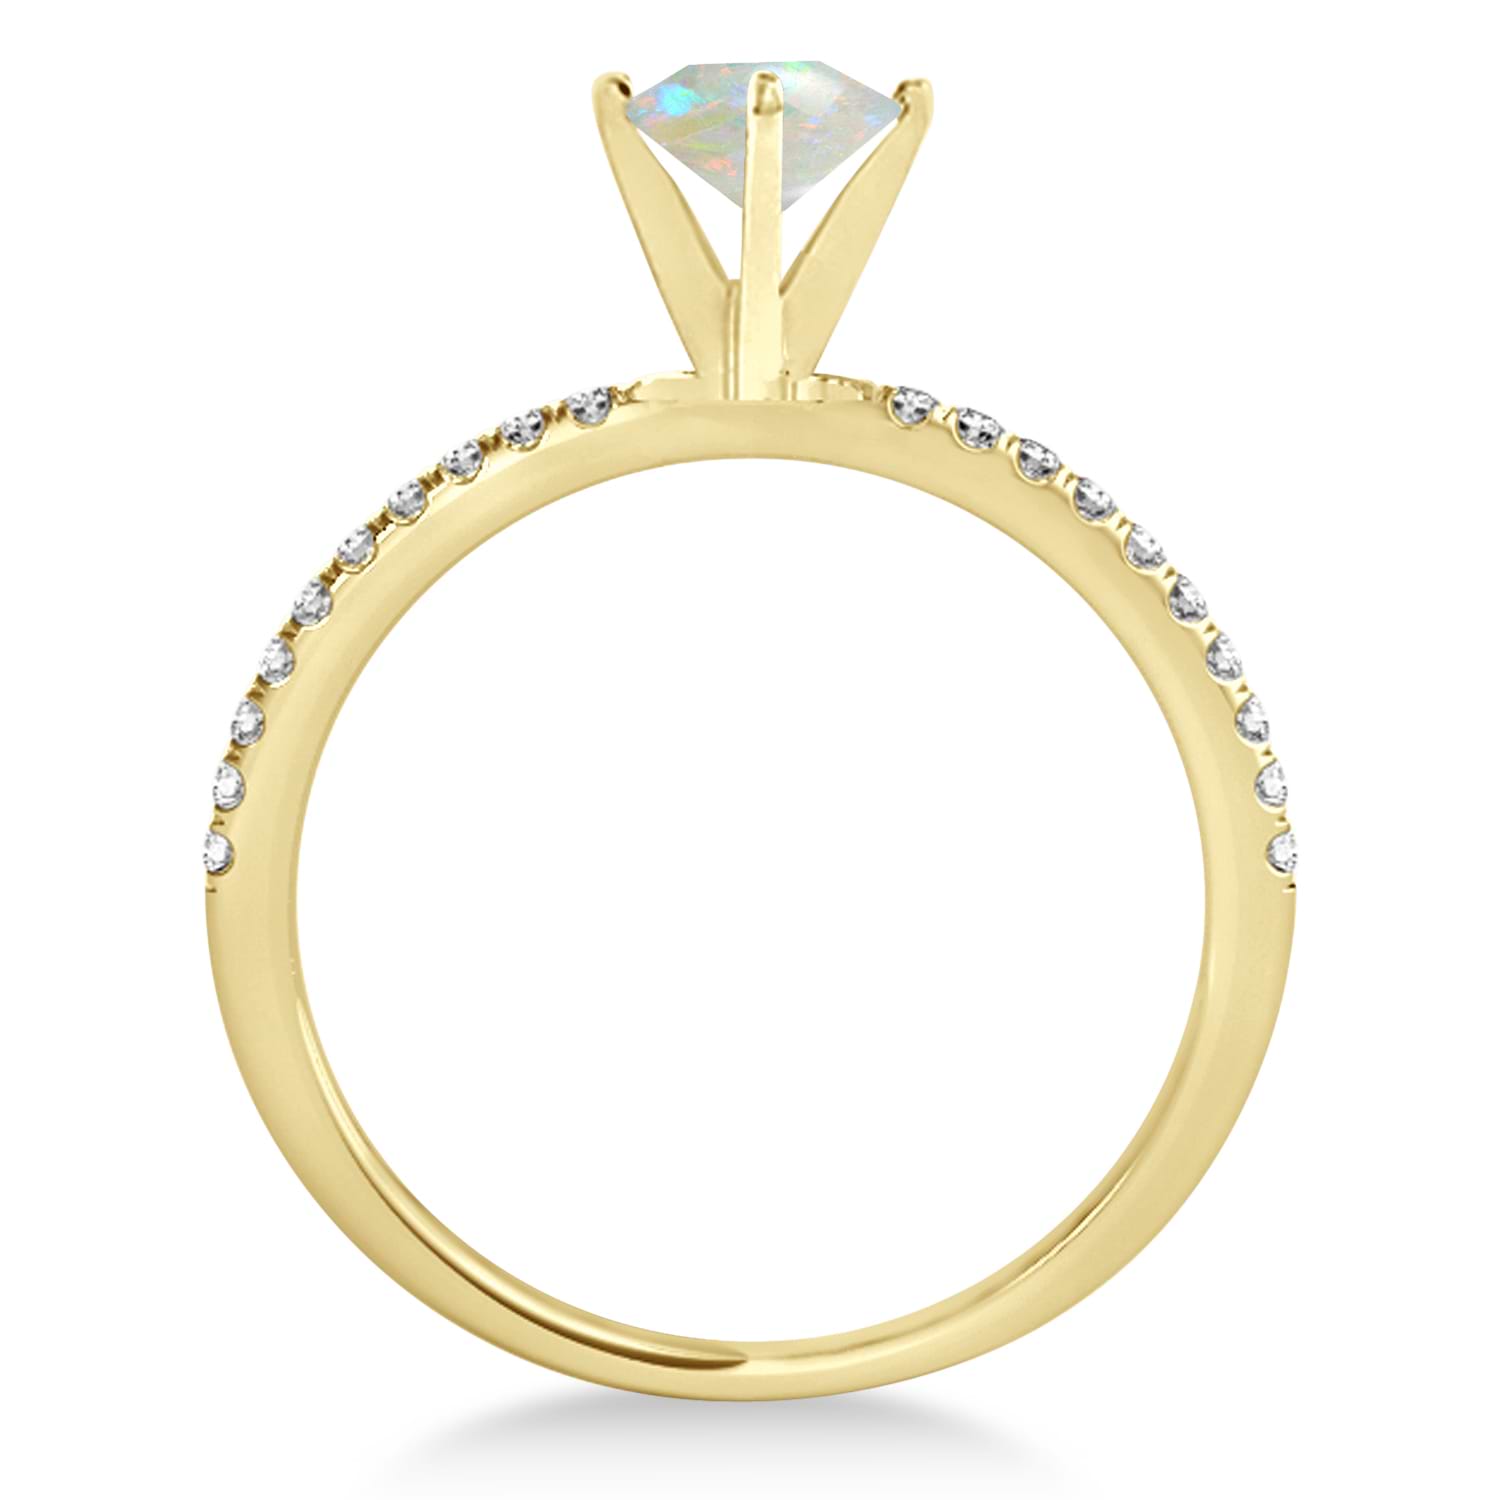 Opal & Diamond Accented Oval Shape Engagement Ring 18k Yellow Gold (1.00ct)